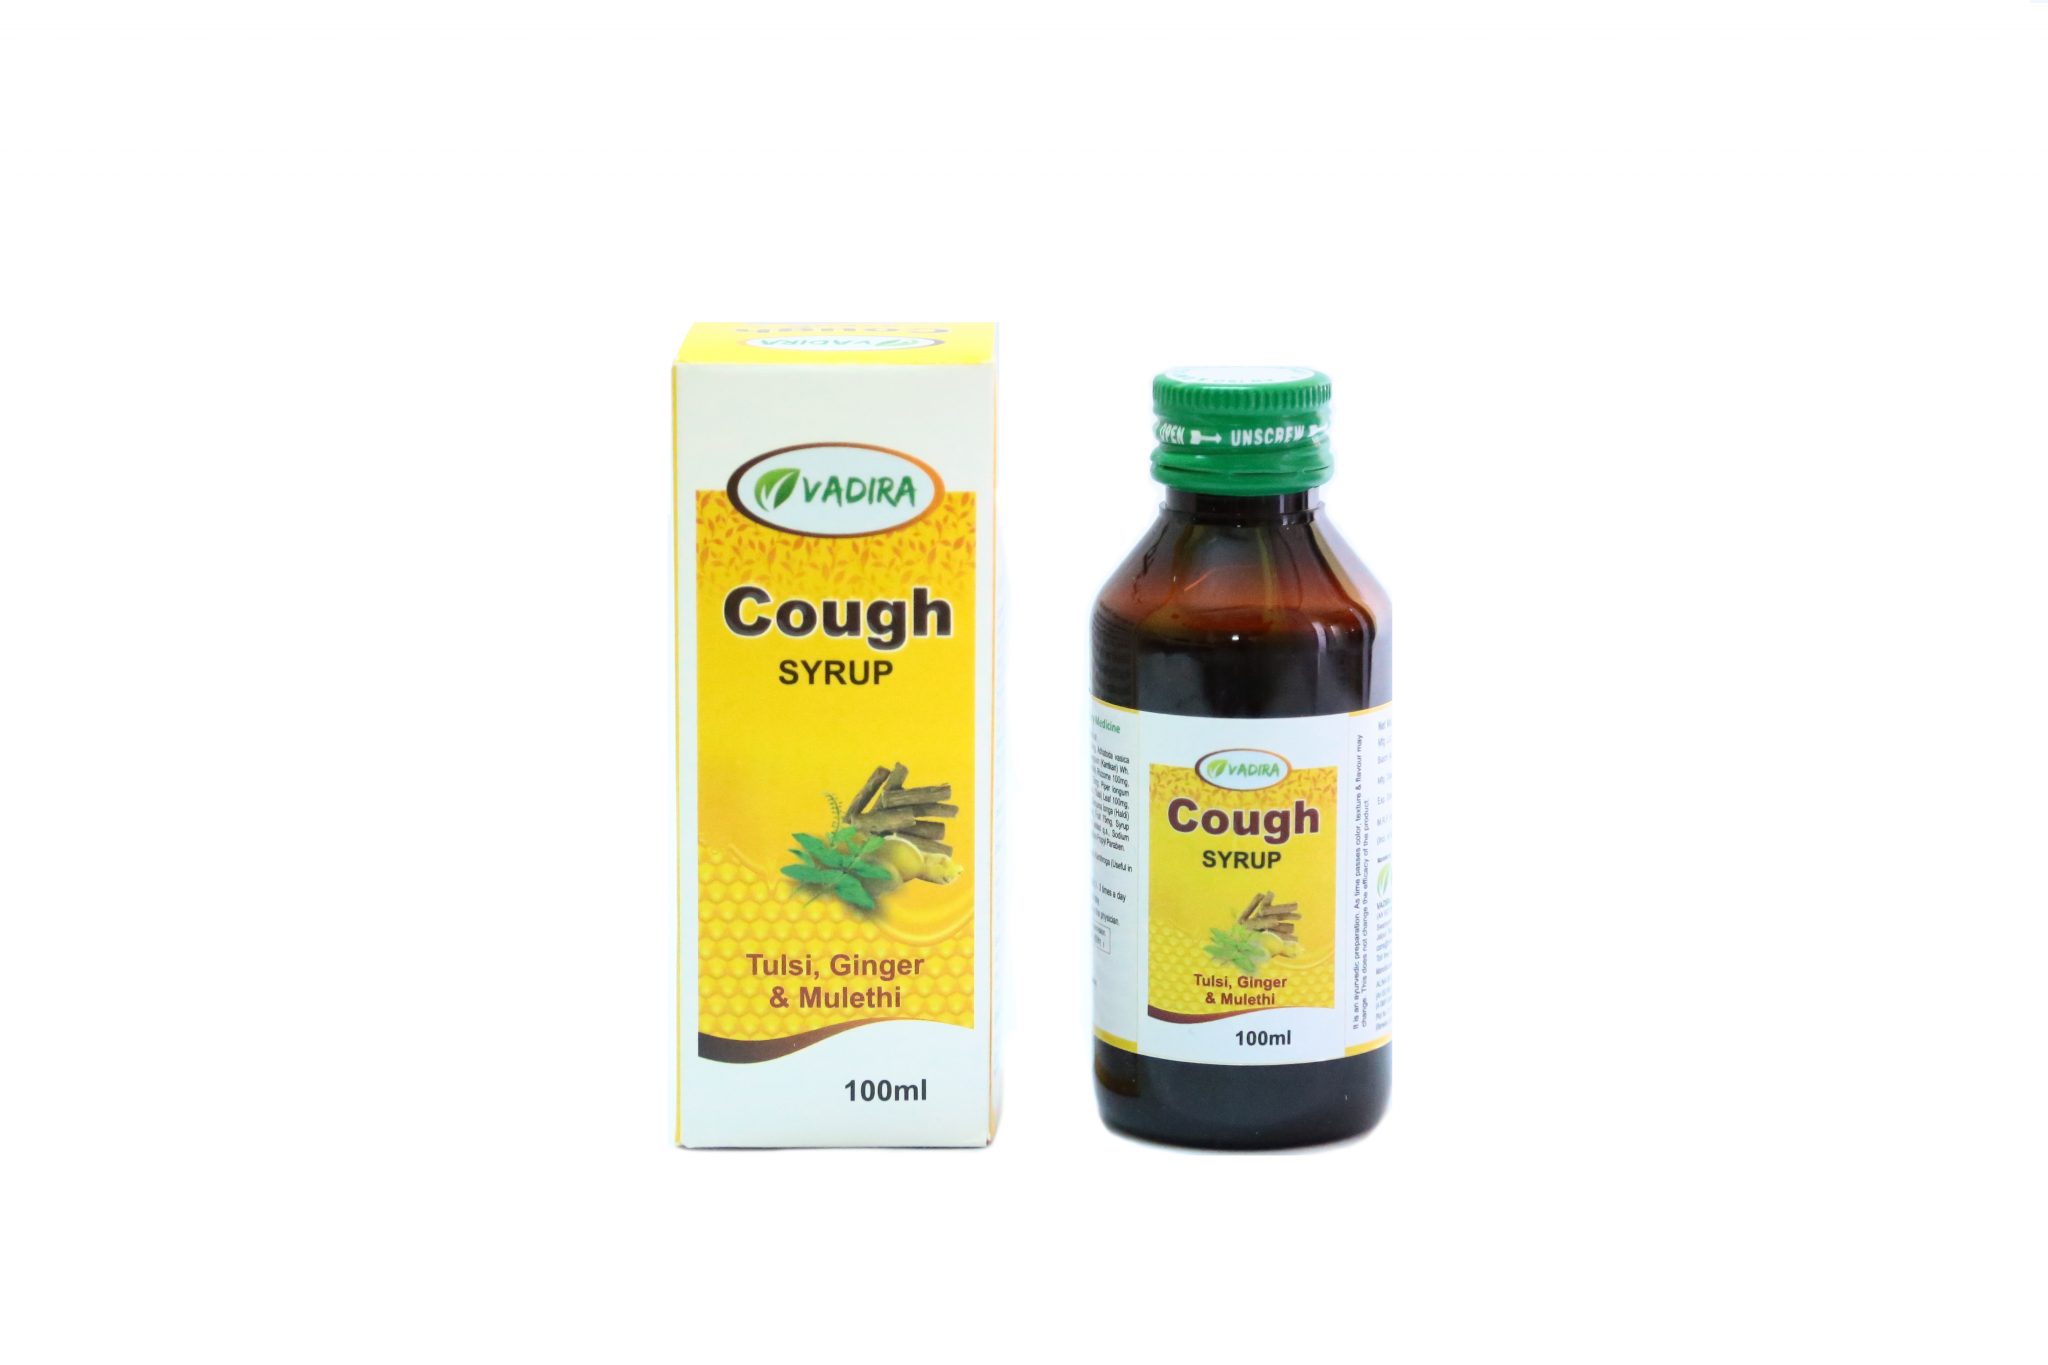 Vadira Cough Syrup | one of the best-selling herbal products